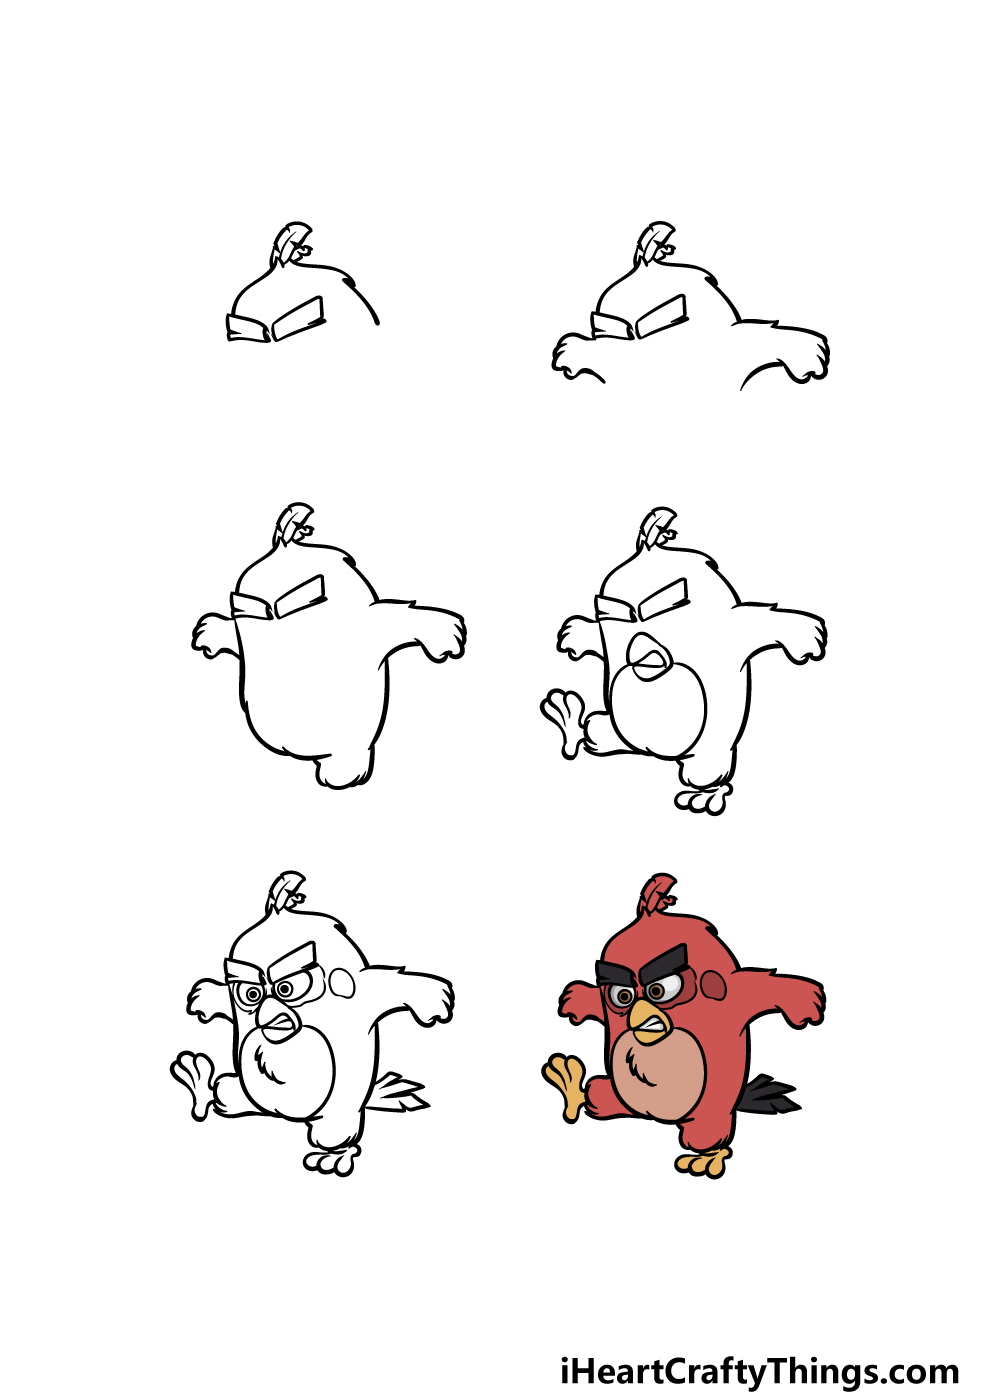 How To Draw Red From Angry Birds - Art For Kids Hub --saigonsouth.com.vn